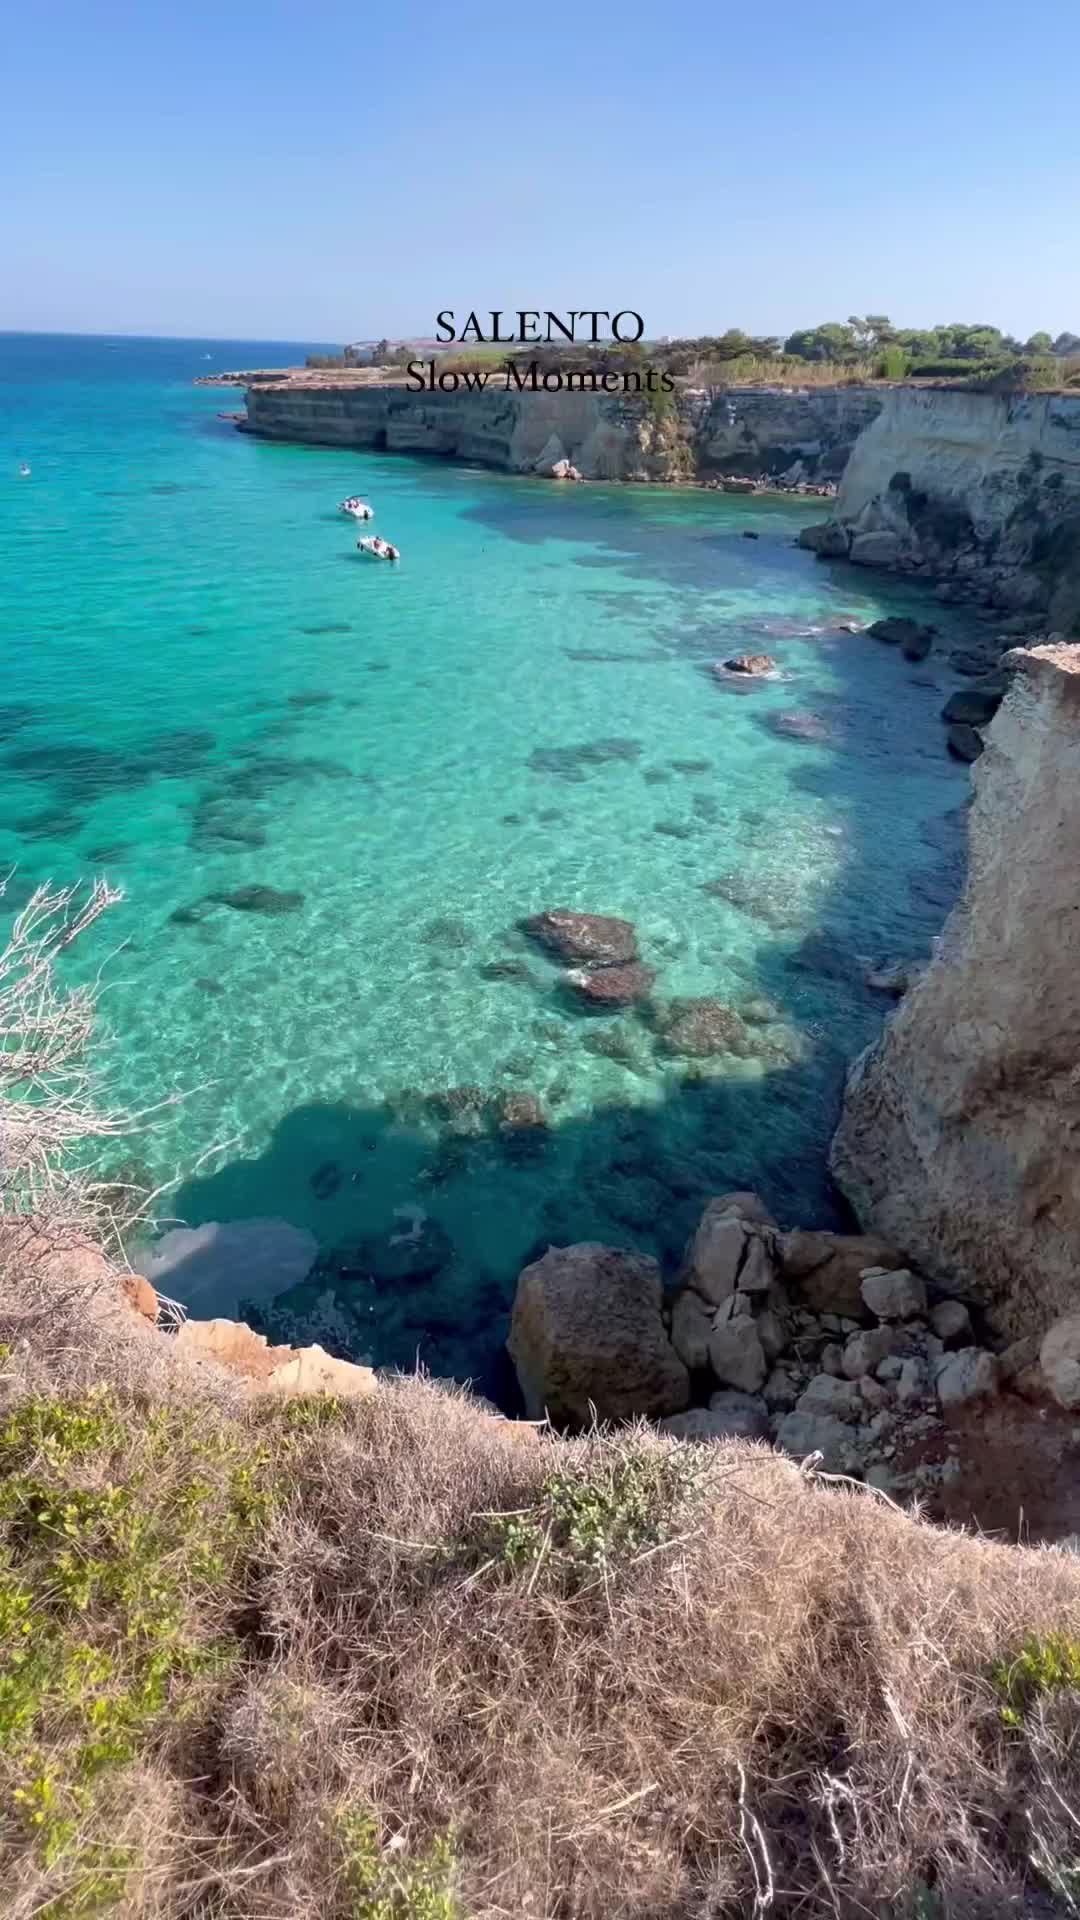 Discover Salento's Hidden Beaches and Slow Moments